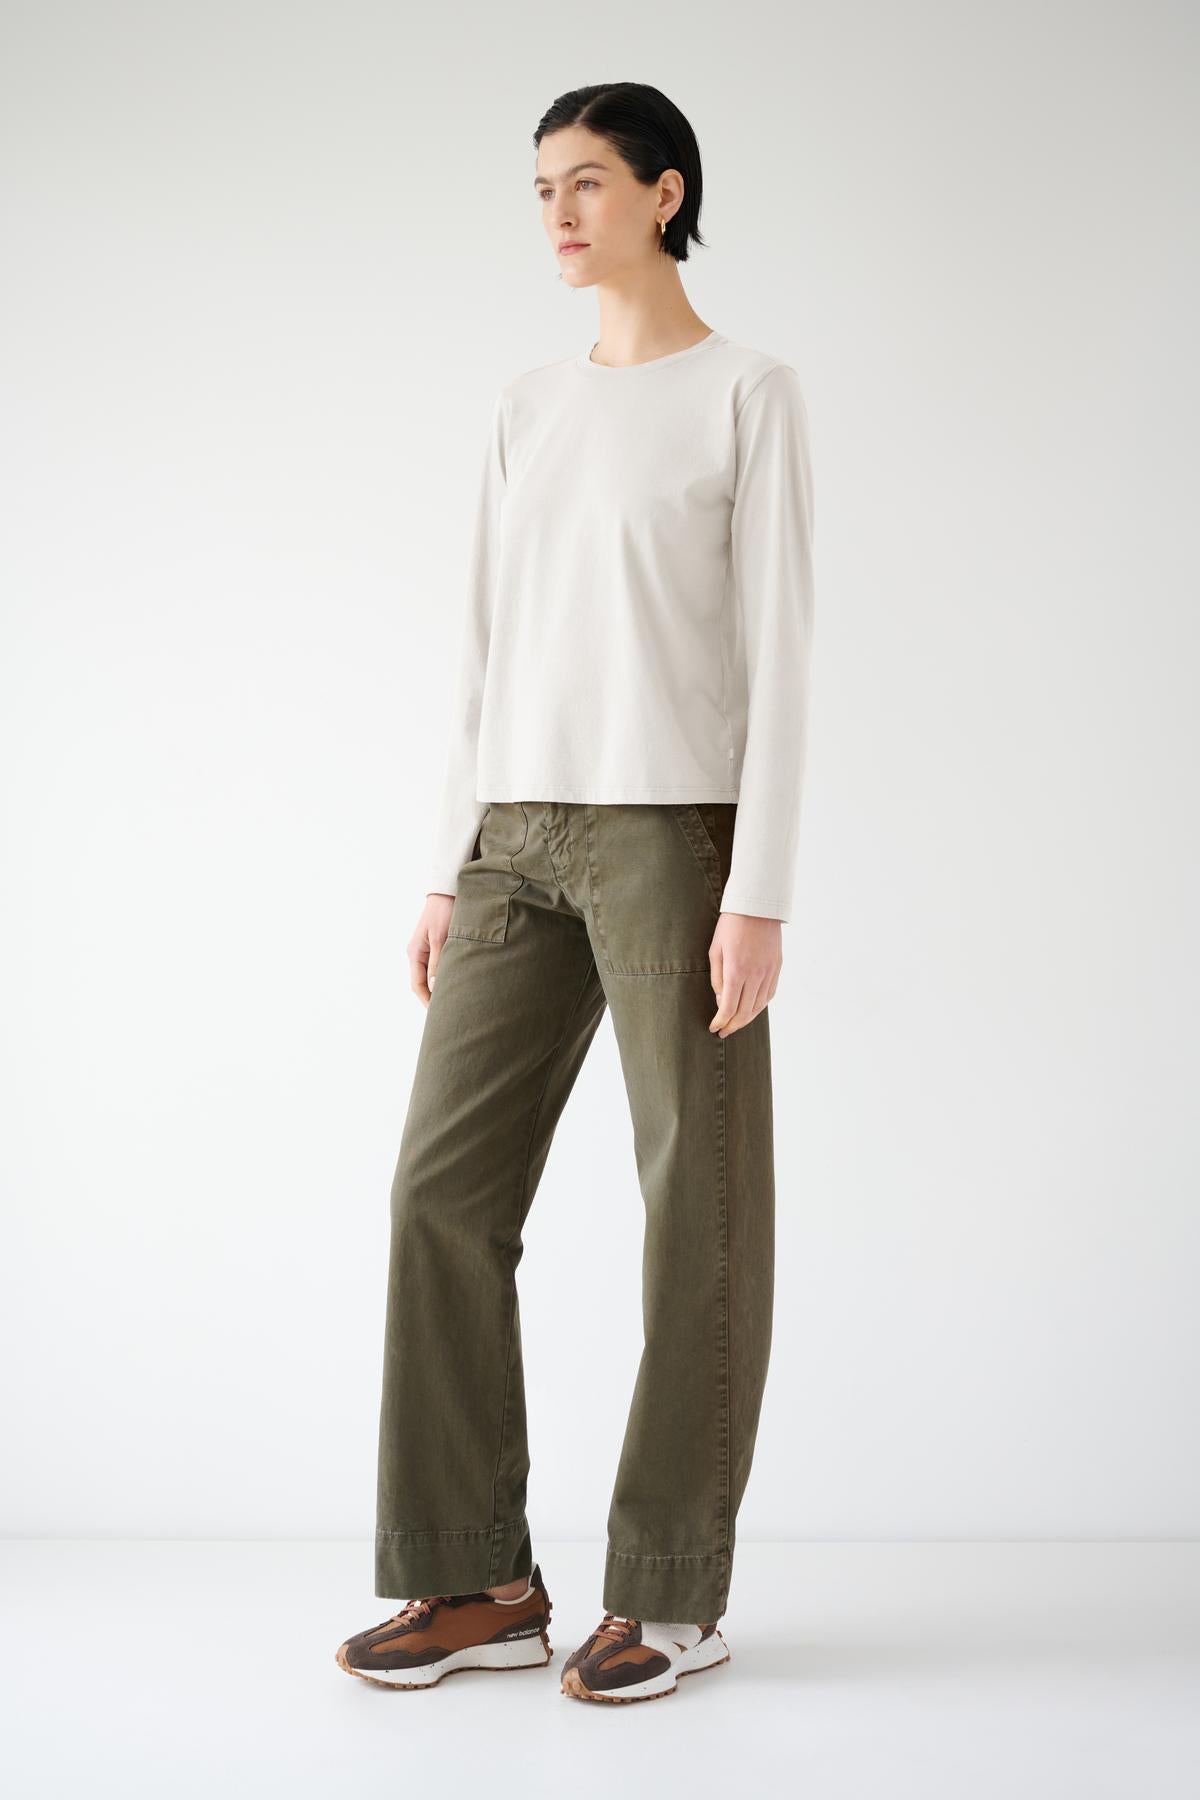 The model is wearing a relaxed fit VICENTE TEE shirt and olive pants made from organic cotton. (Brand: Velvet by Jenny Graham)-35473633771713